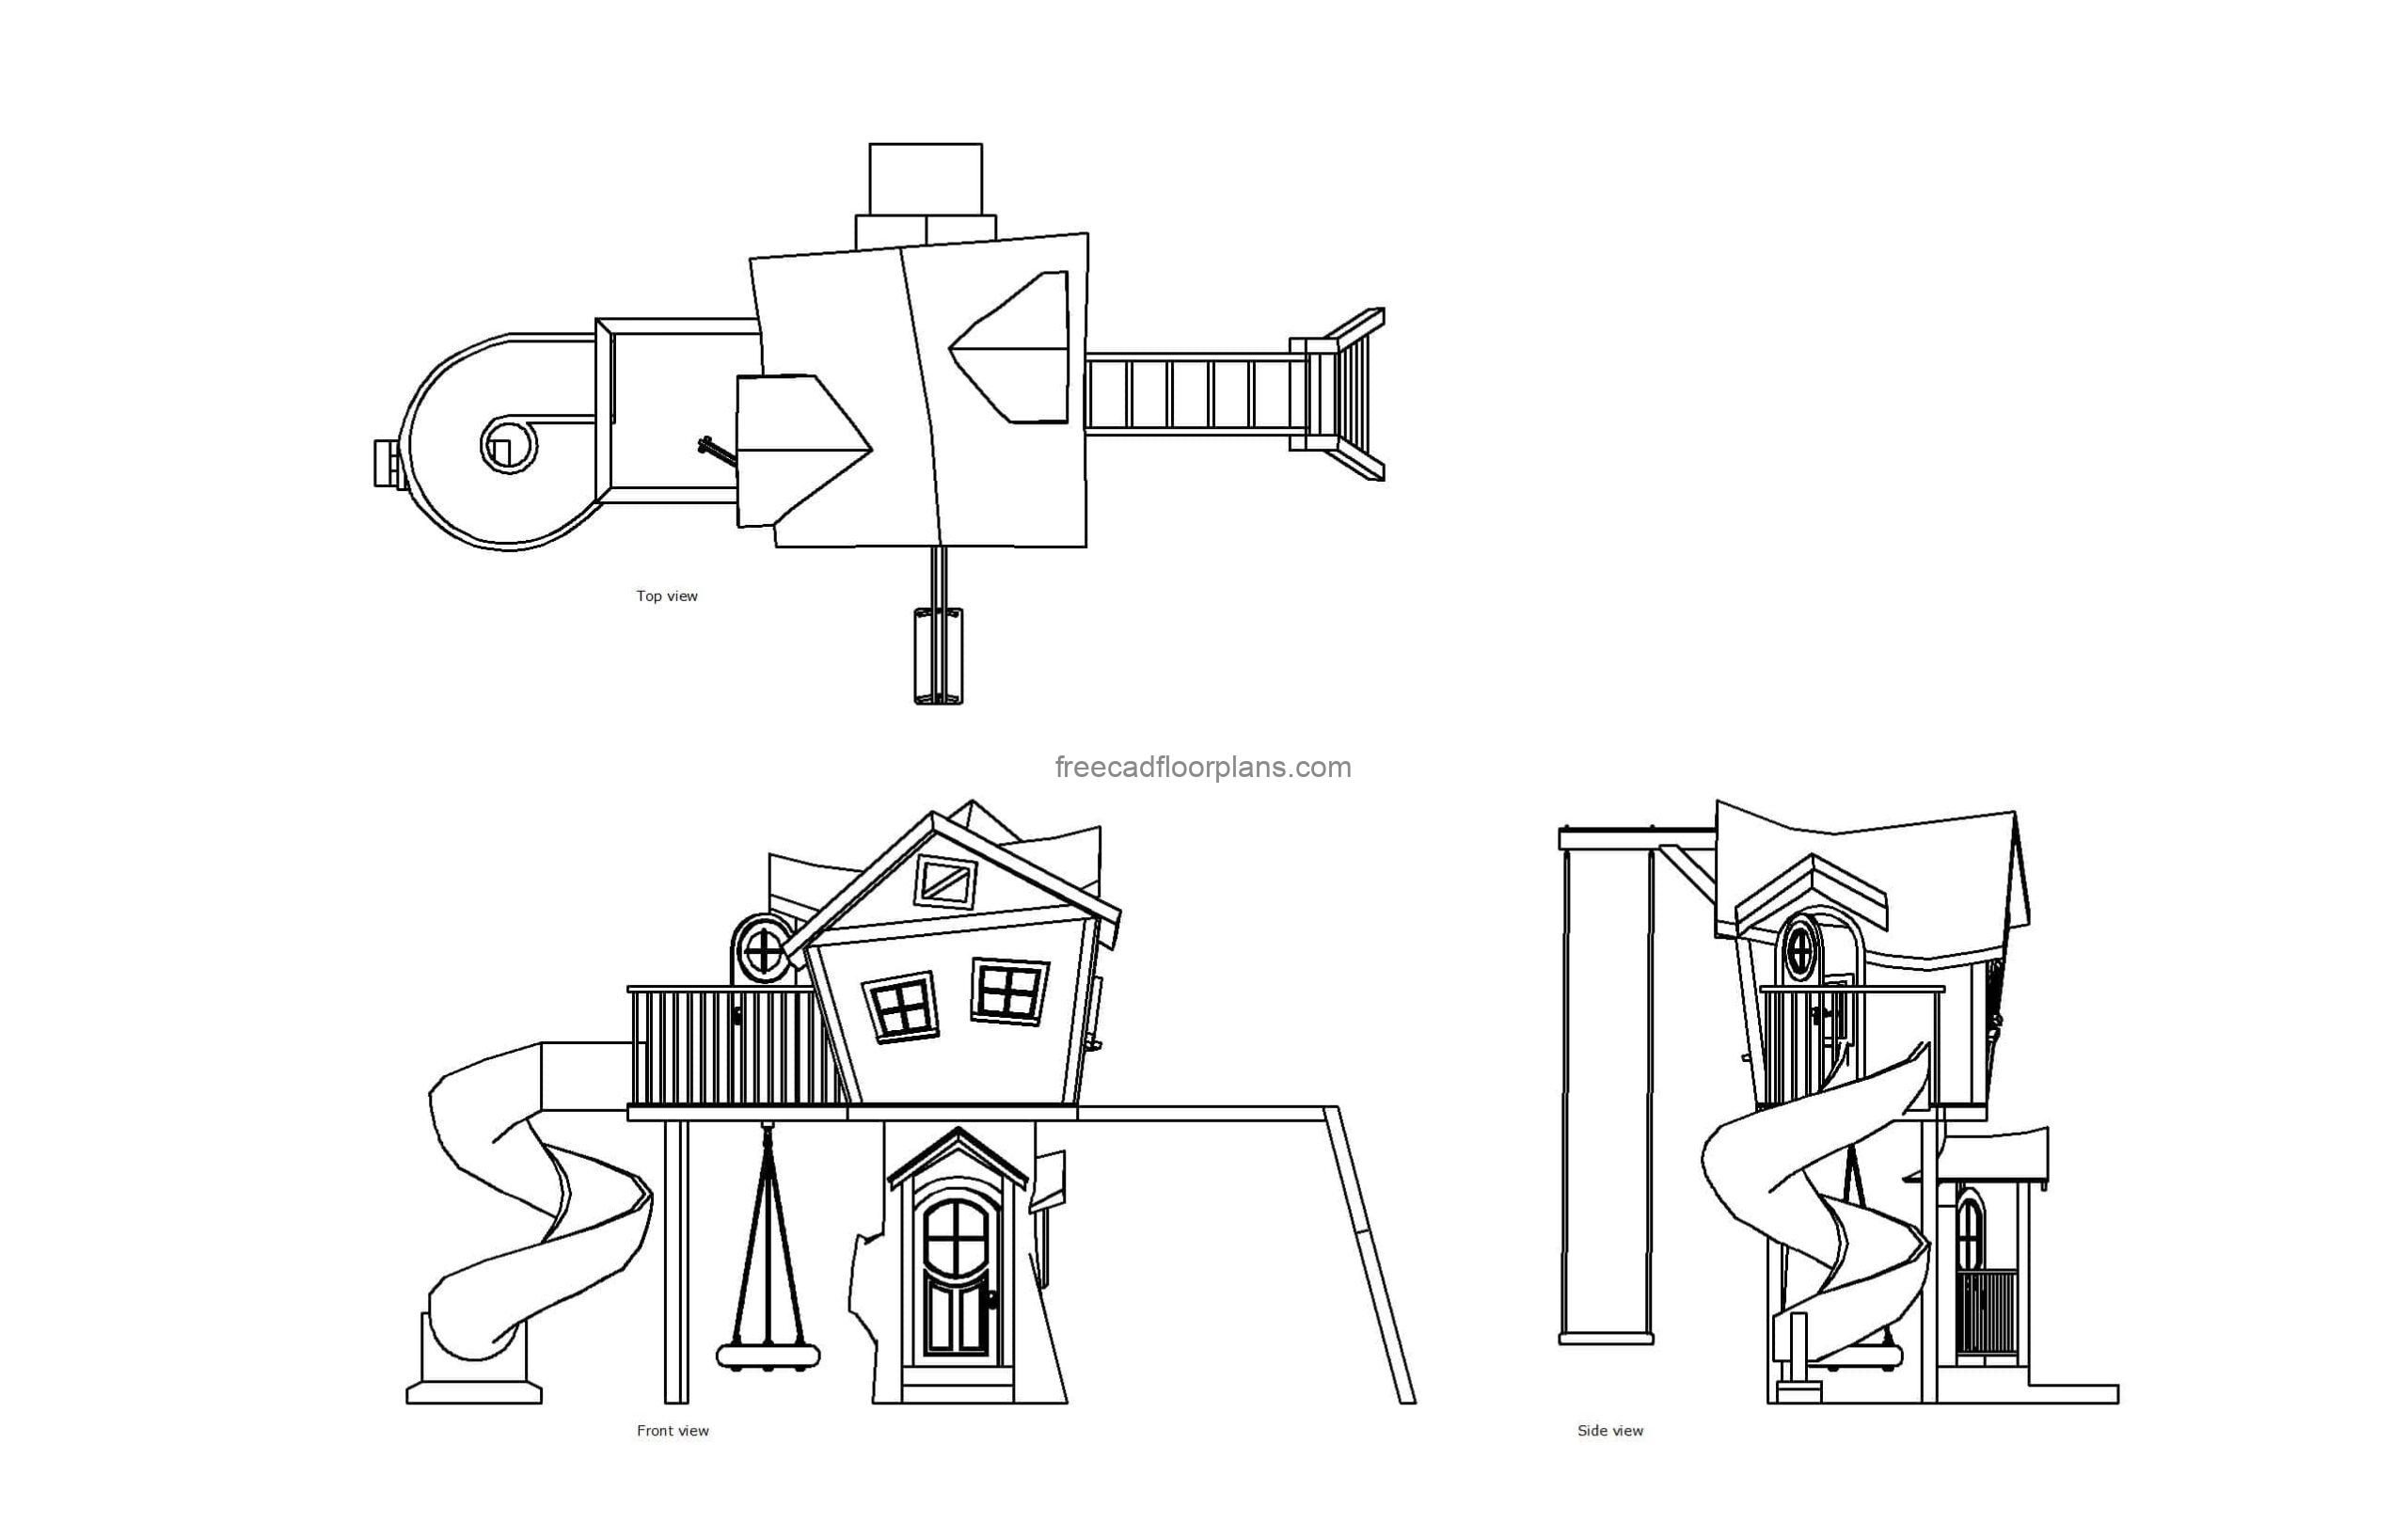 autocad drawing of a tree house for playgrounds, plan and elevation 2d views, dwg file free for download